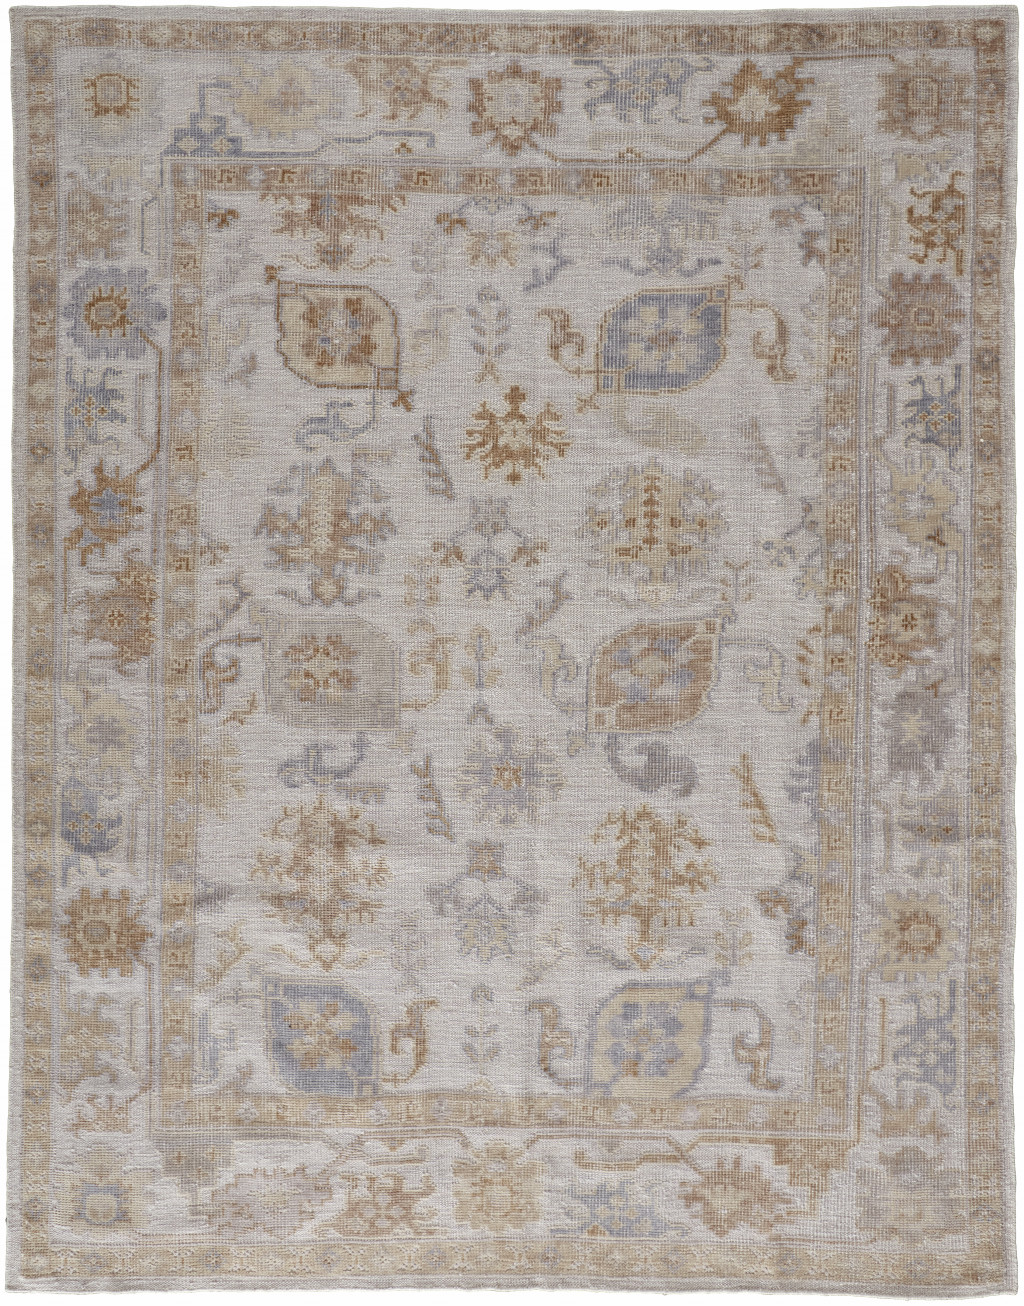 10' X 14' Ivory And Tan Floral Hand Knotted Stain Resistant Area Rug-514981-1